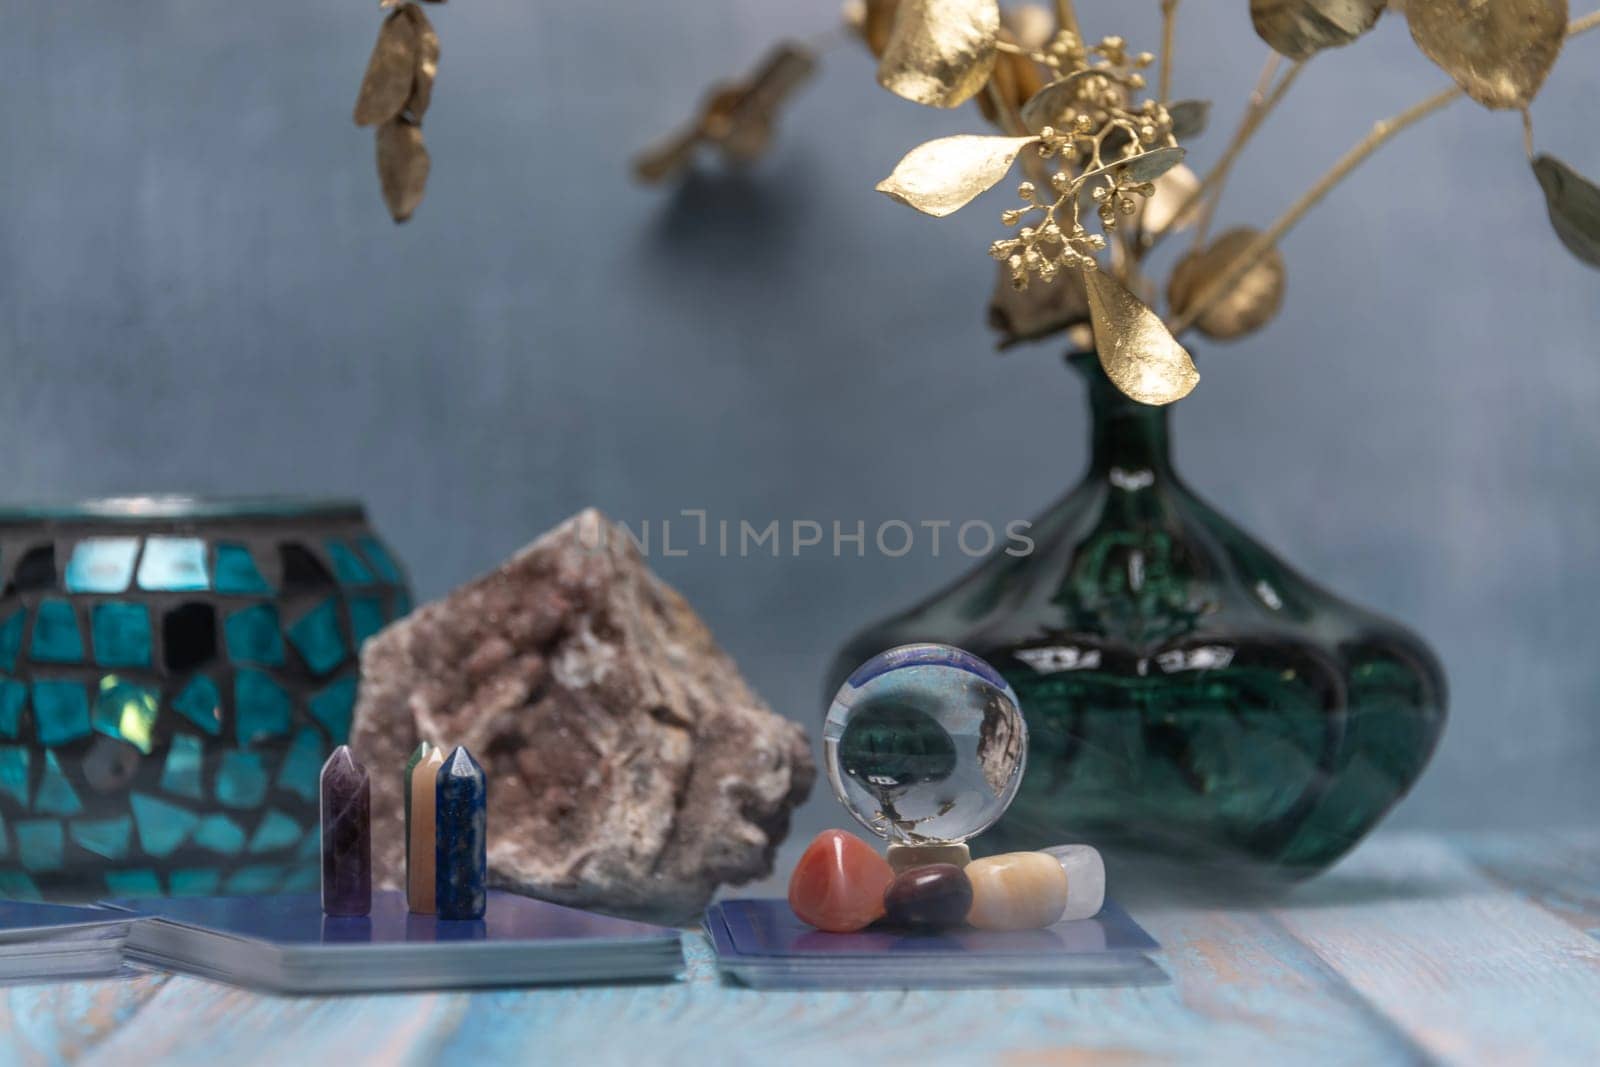 A serene tarot card reading space with assorted healing crystals, a candle lantern, and a geode on a weathered wooden surface. by jbruiz78